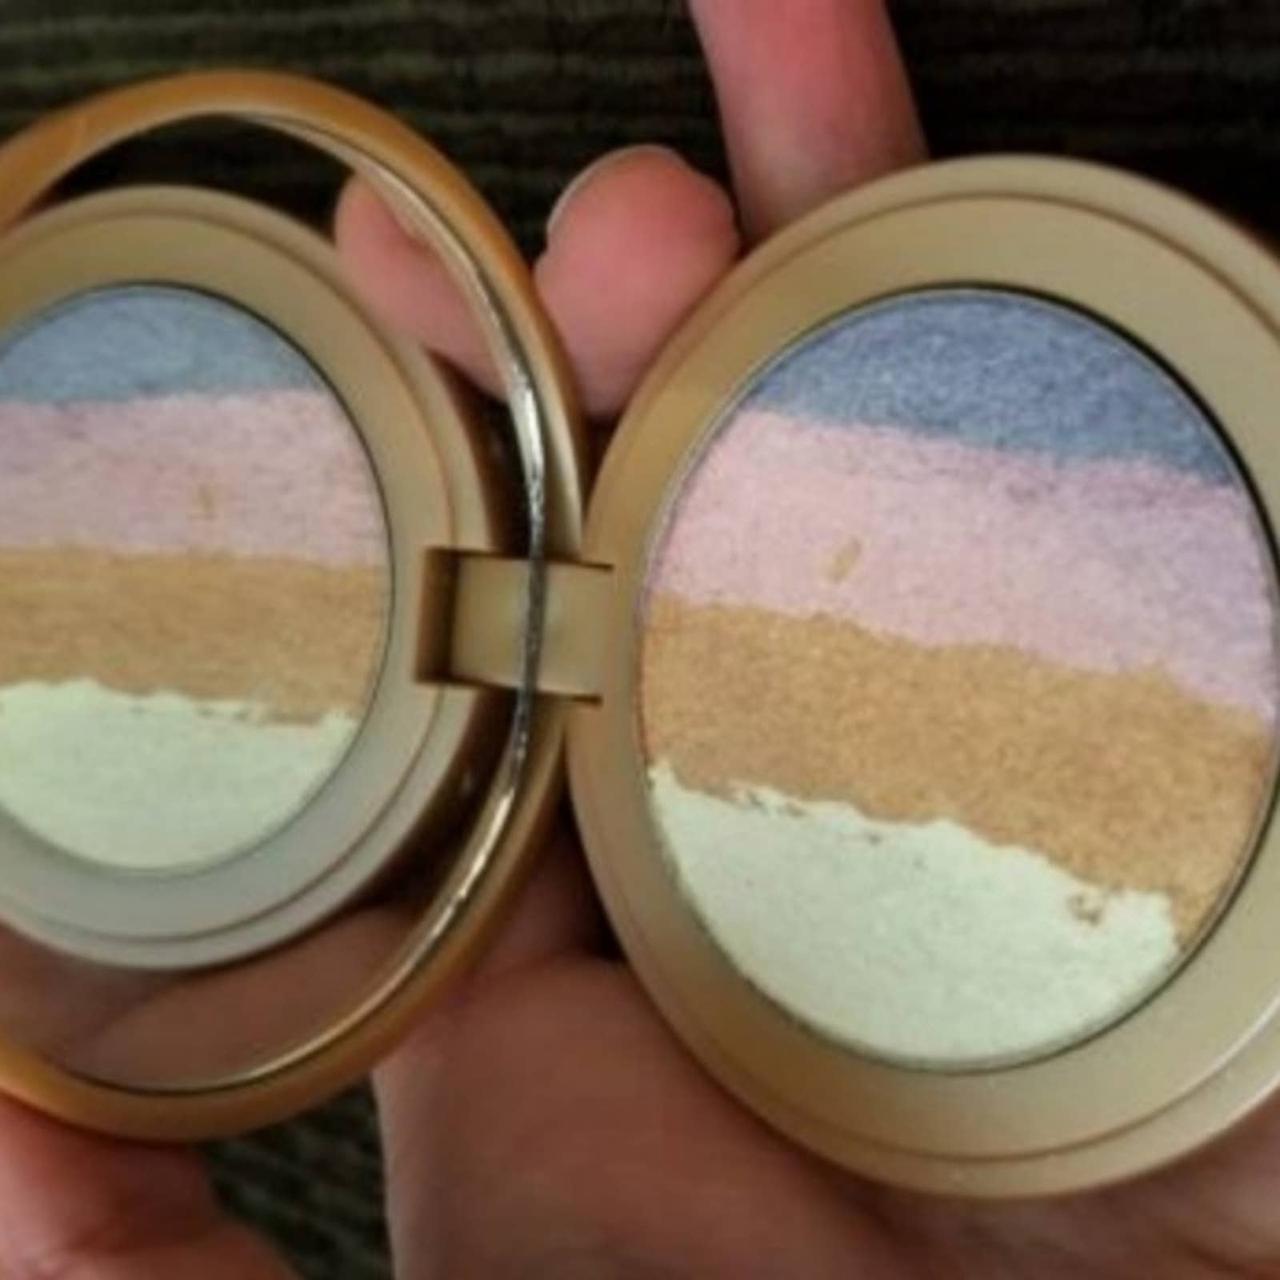 Product Image 2 - TARTE Rainbow Highlighter Spellbound Glow.

Never